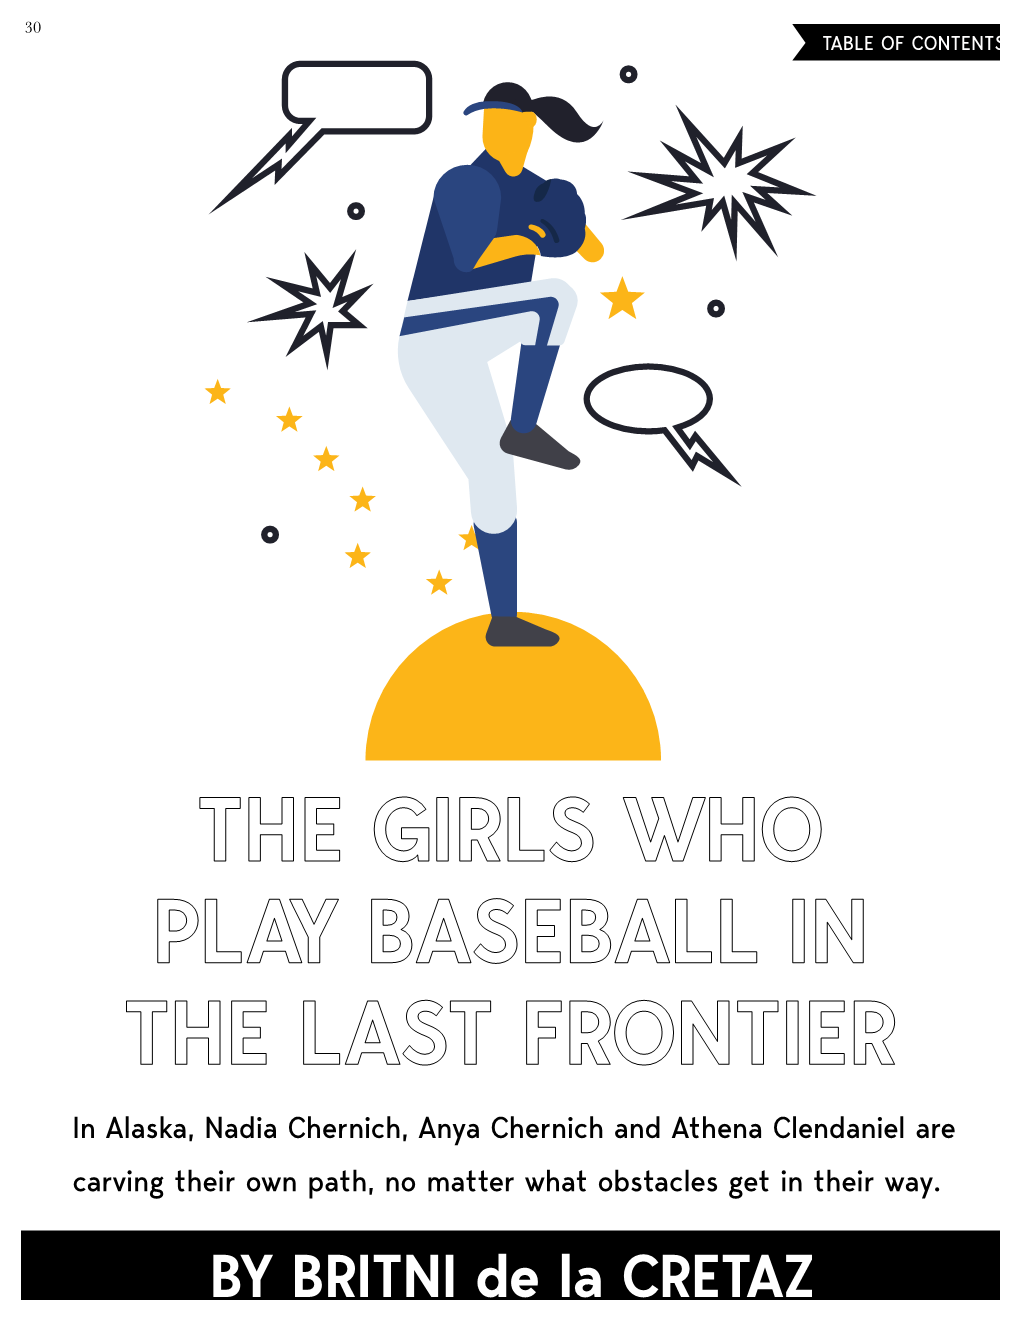 The Girls Who Play Baseball in the Last Frontier